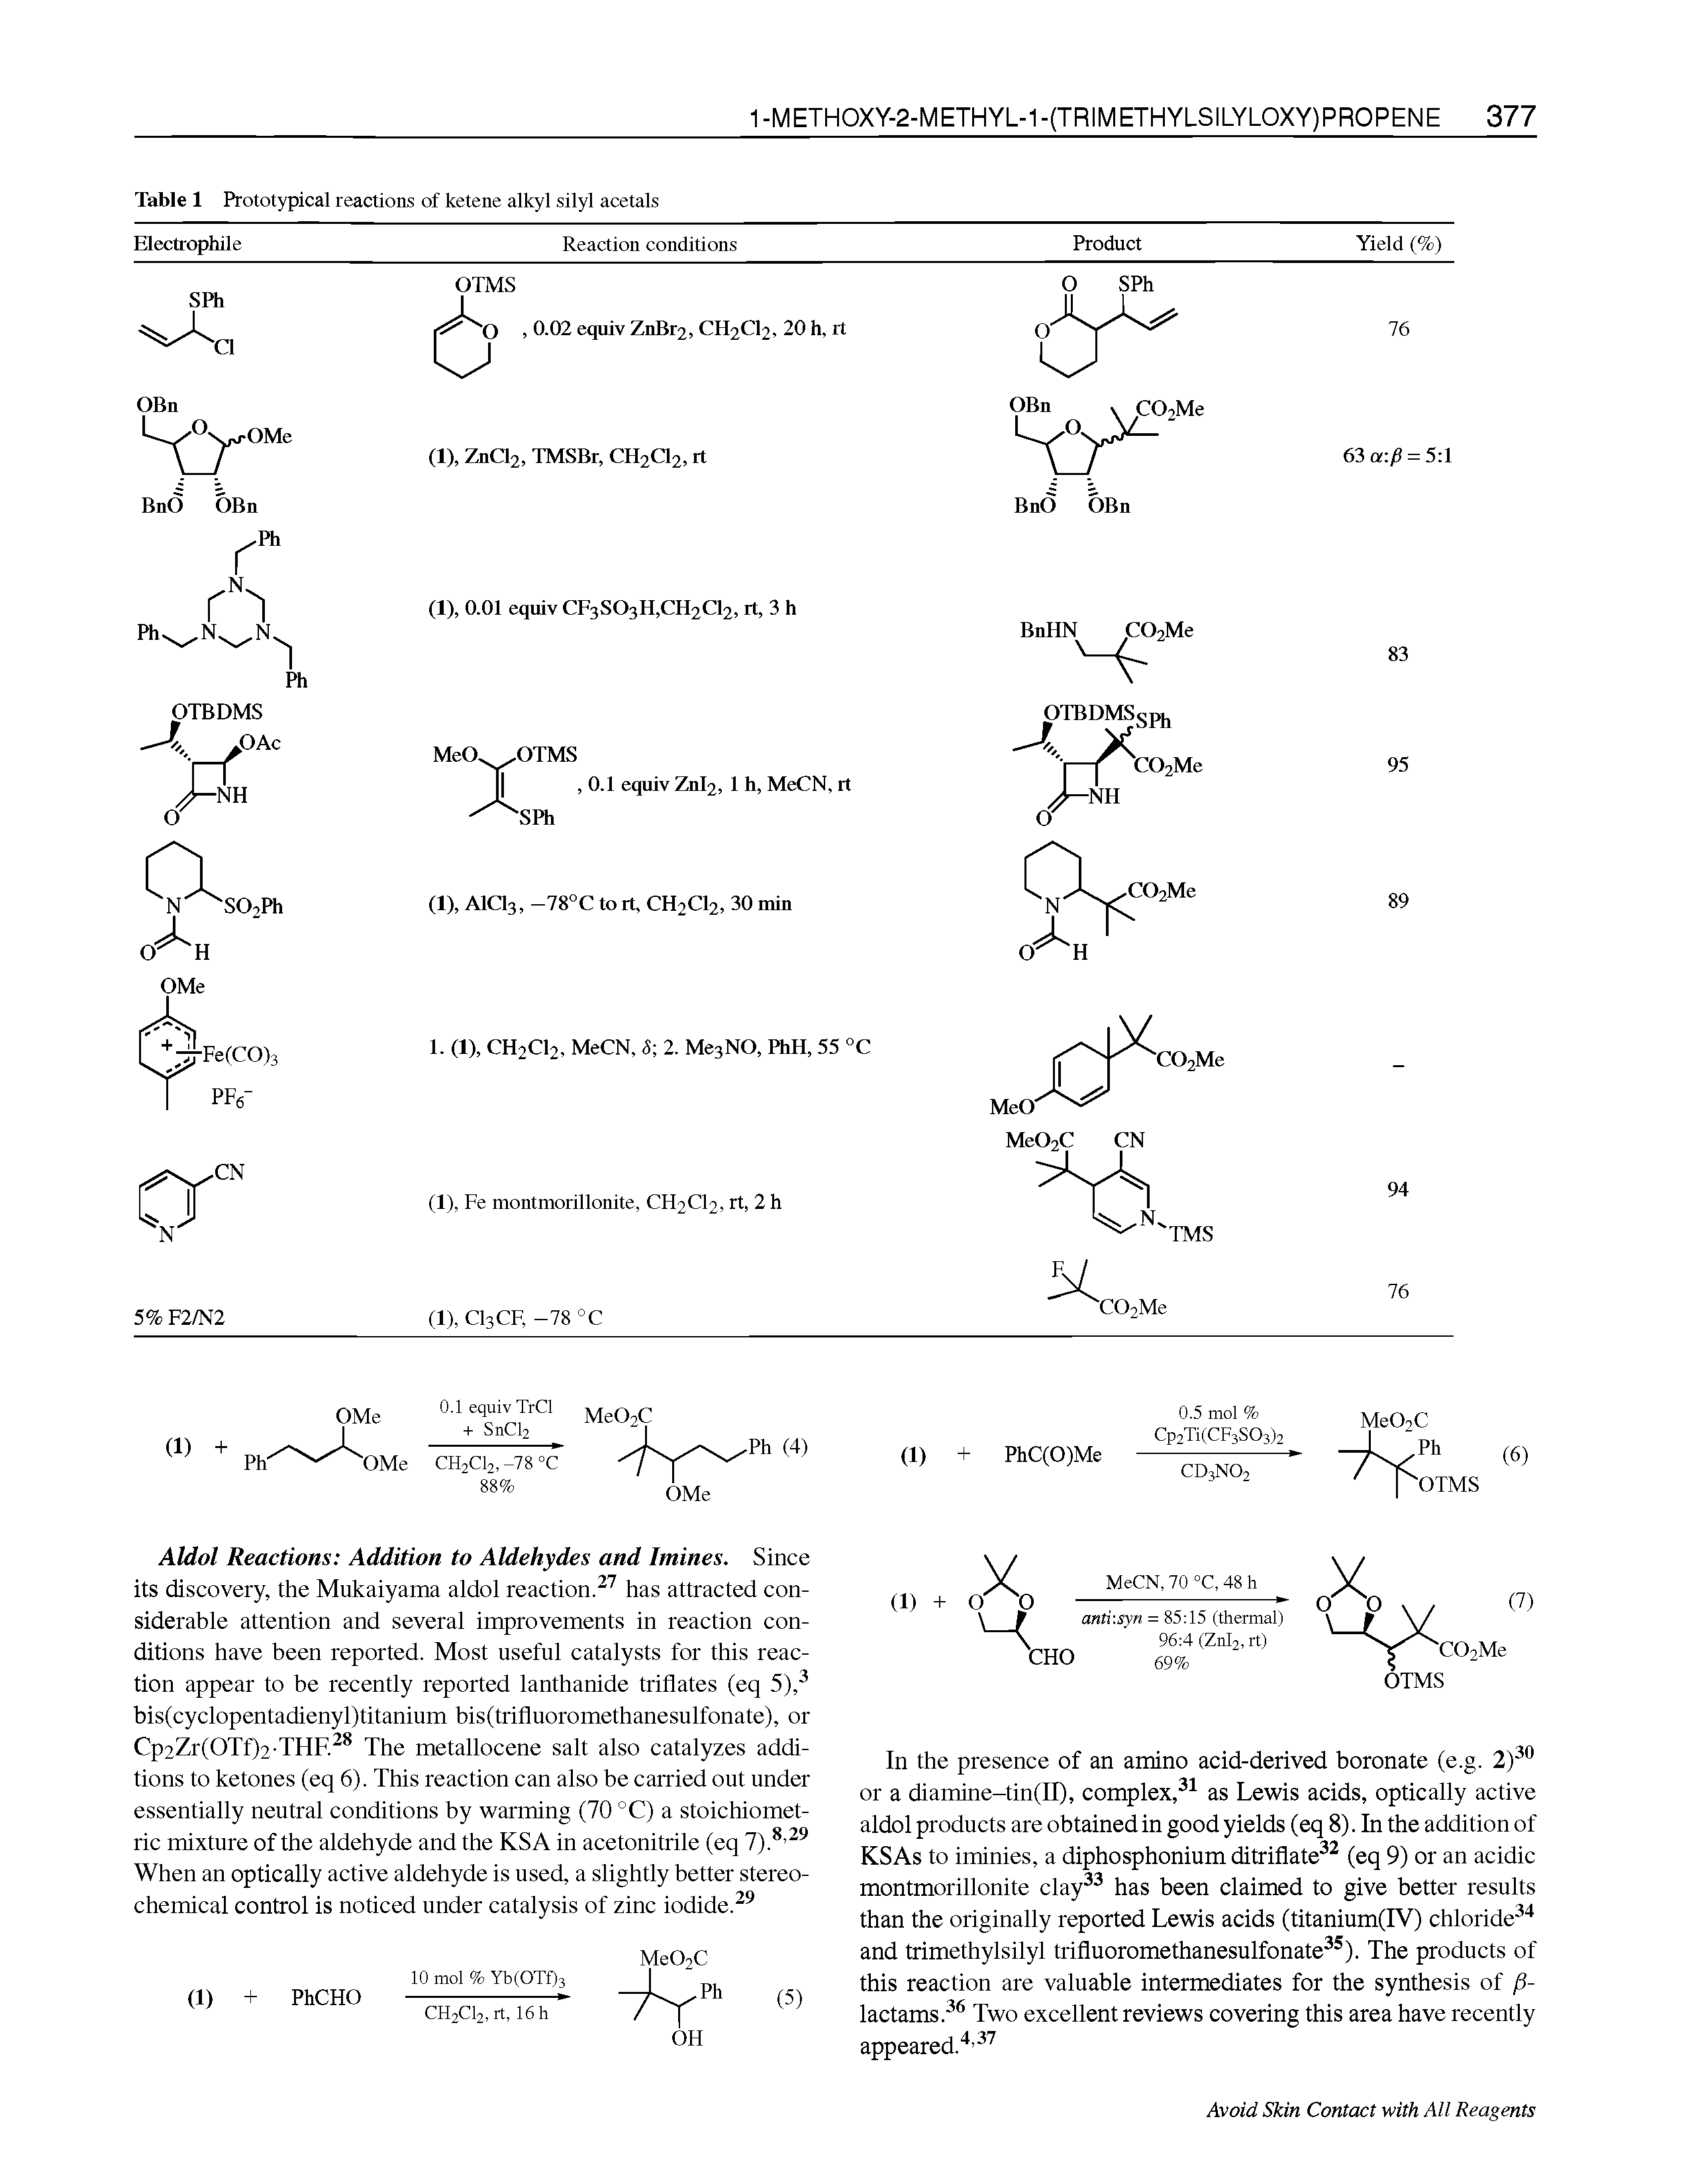 Table 1 Prototypical reactions of ketene alkyl silyl acetals...